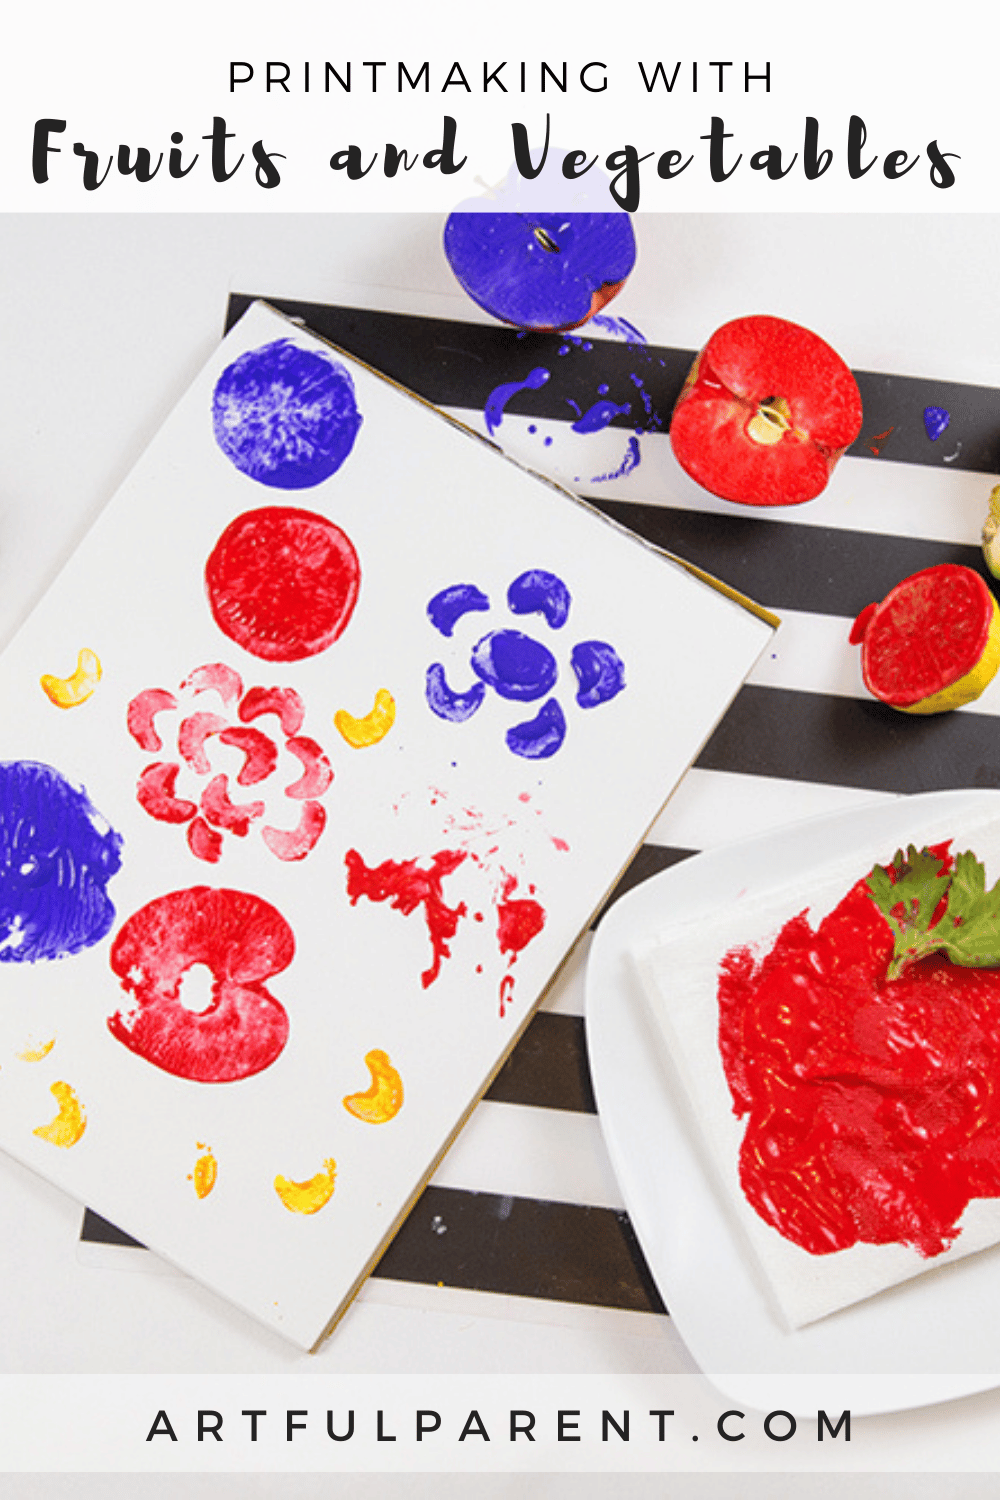 How to Make Fruit and Vegetable Prints